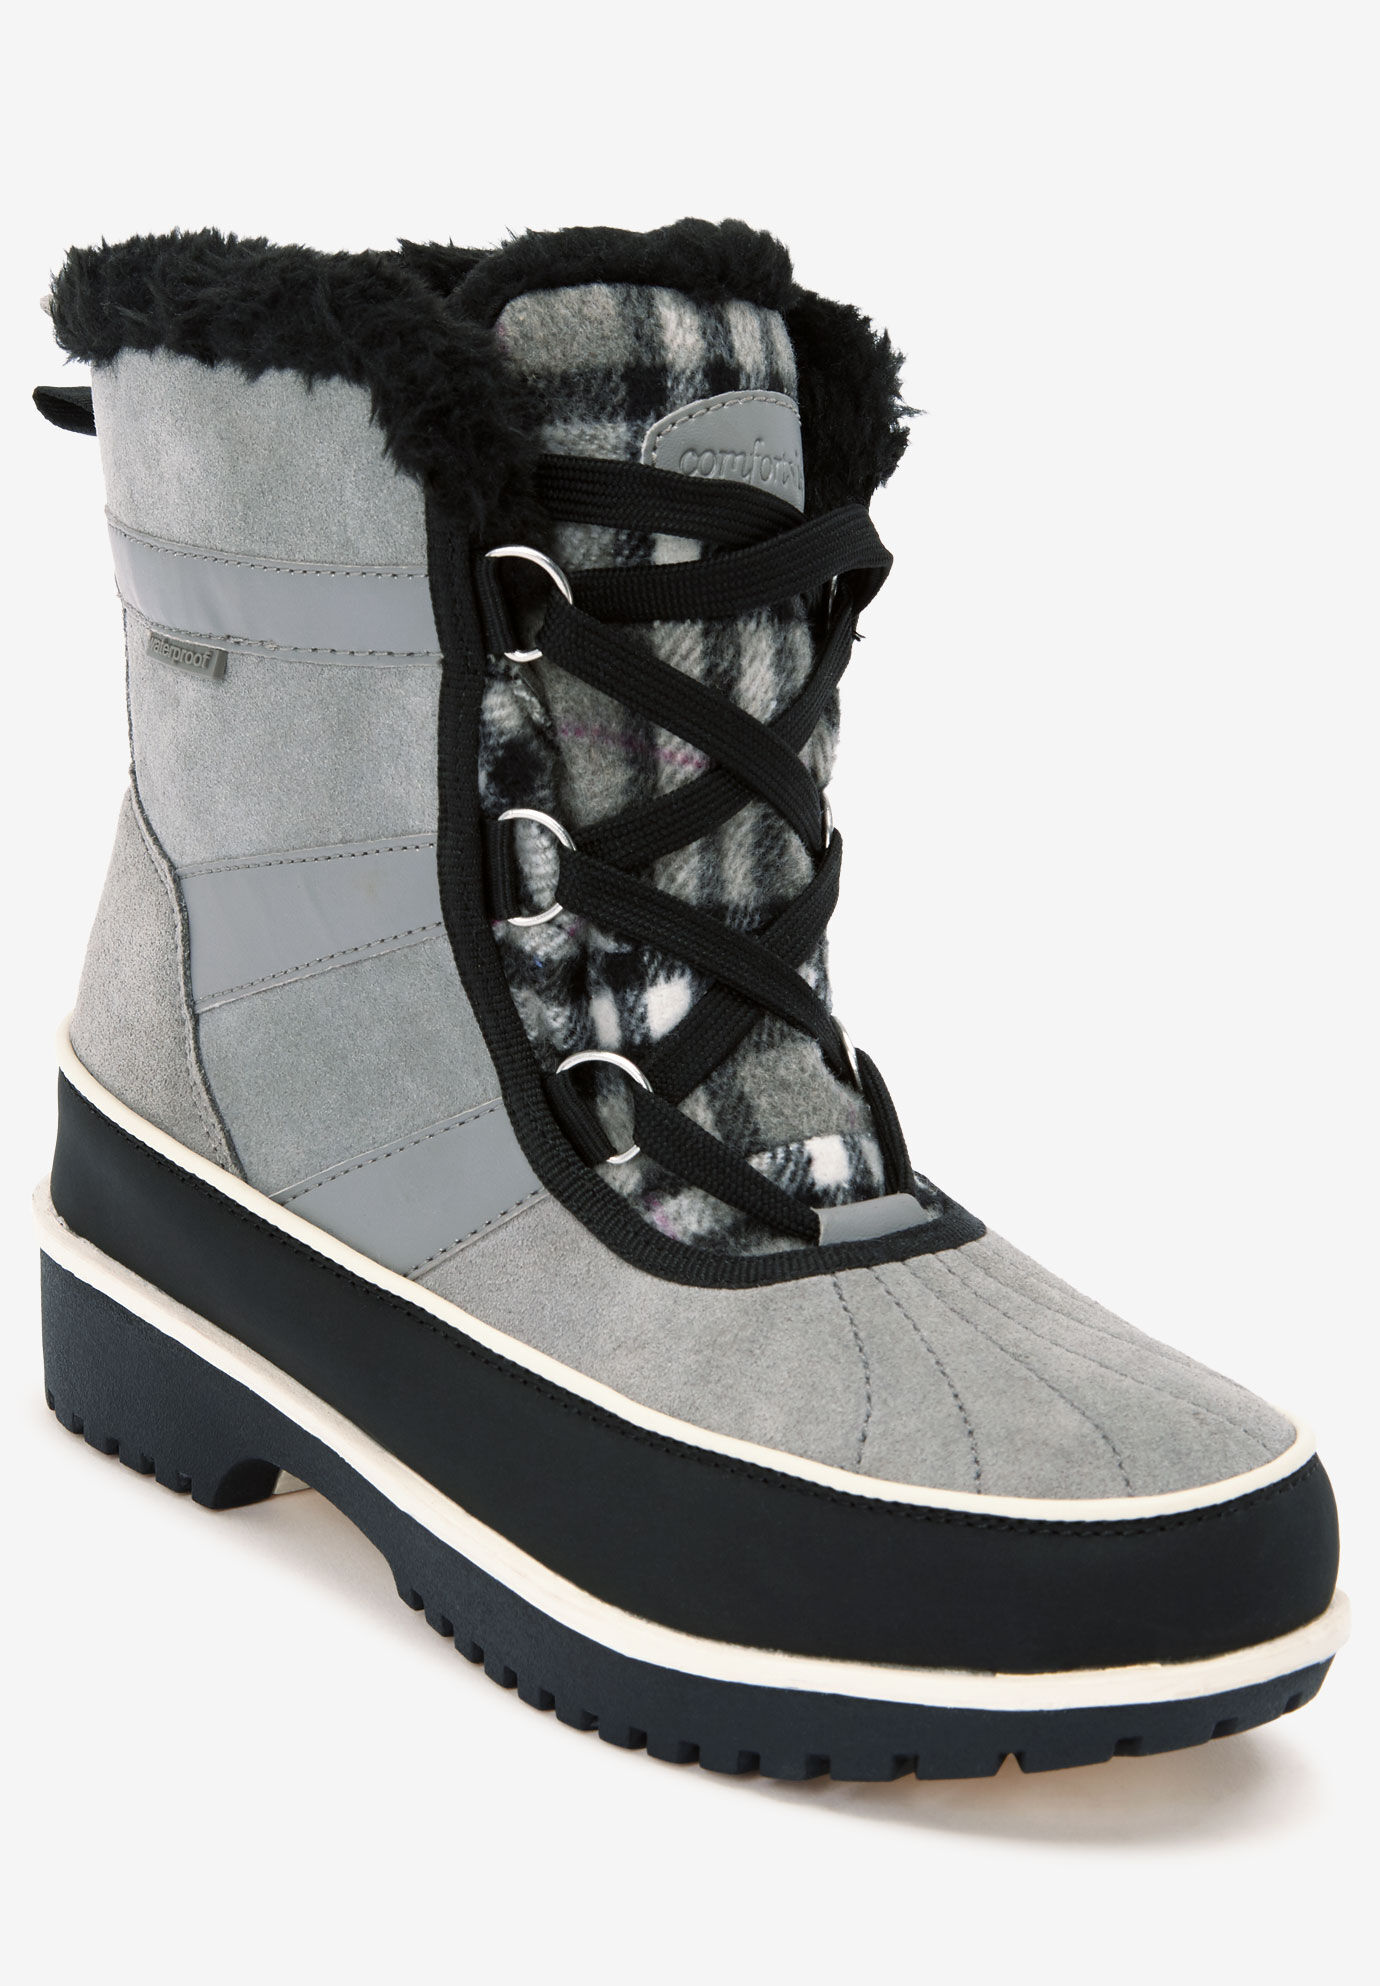 wide size boots womens